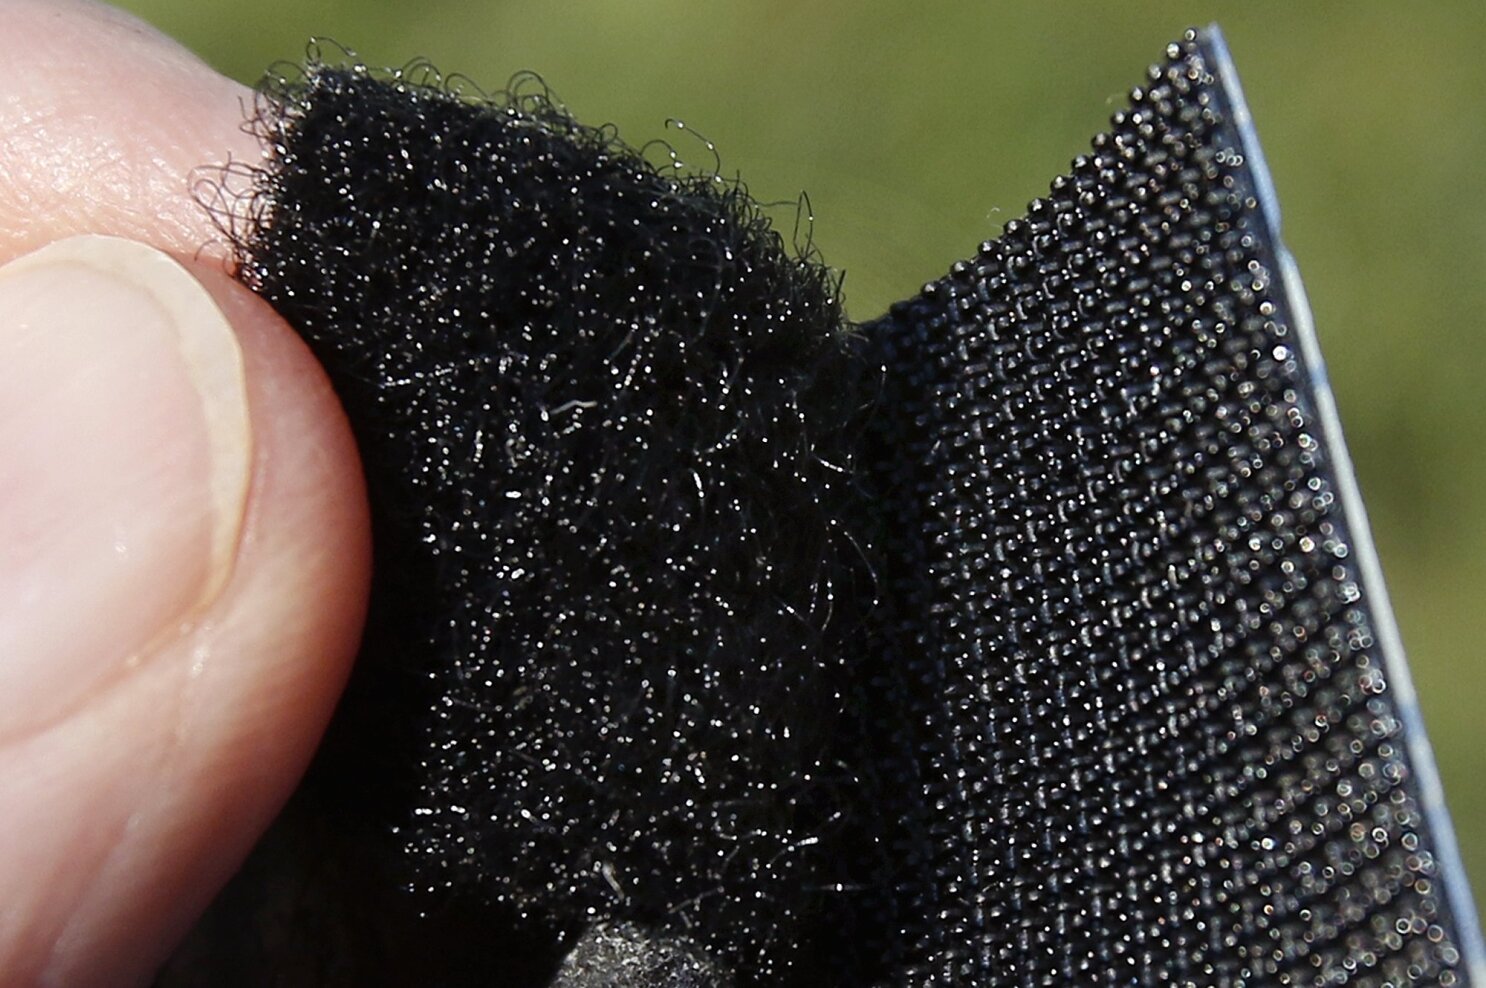 Quick Video! How to Clean Velcro - How to Clean Hook and Loop